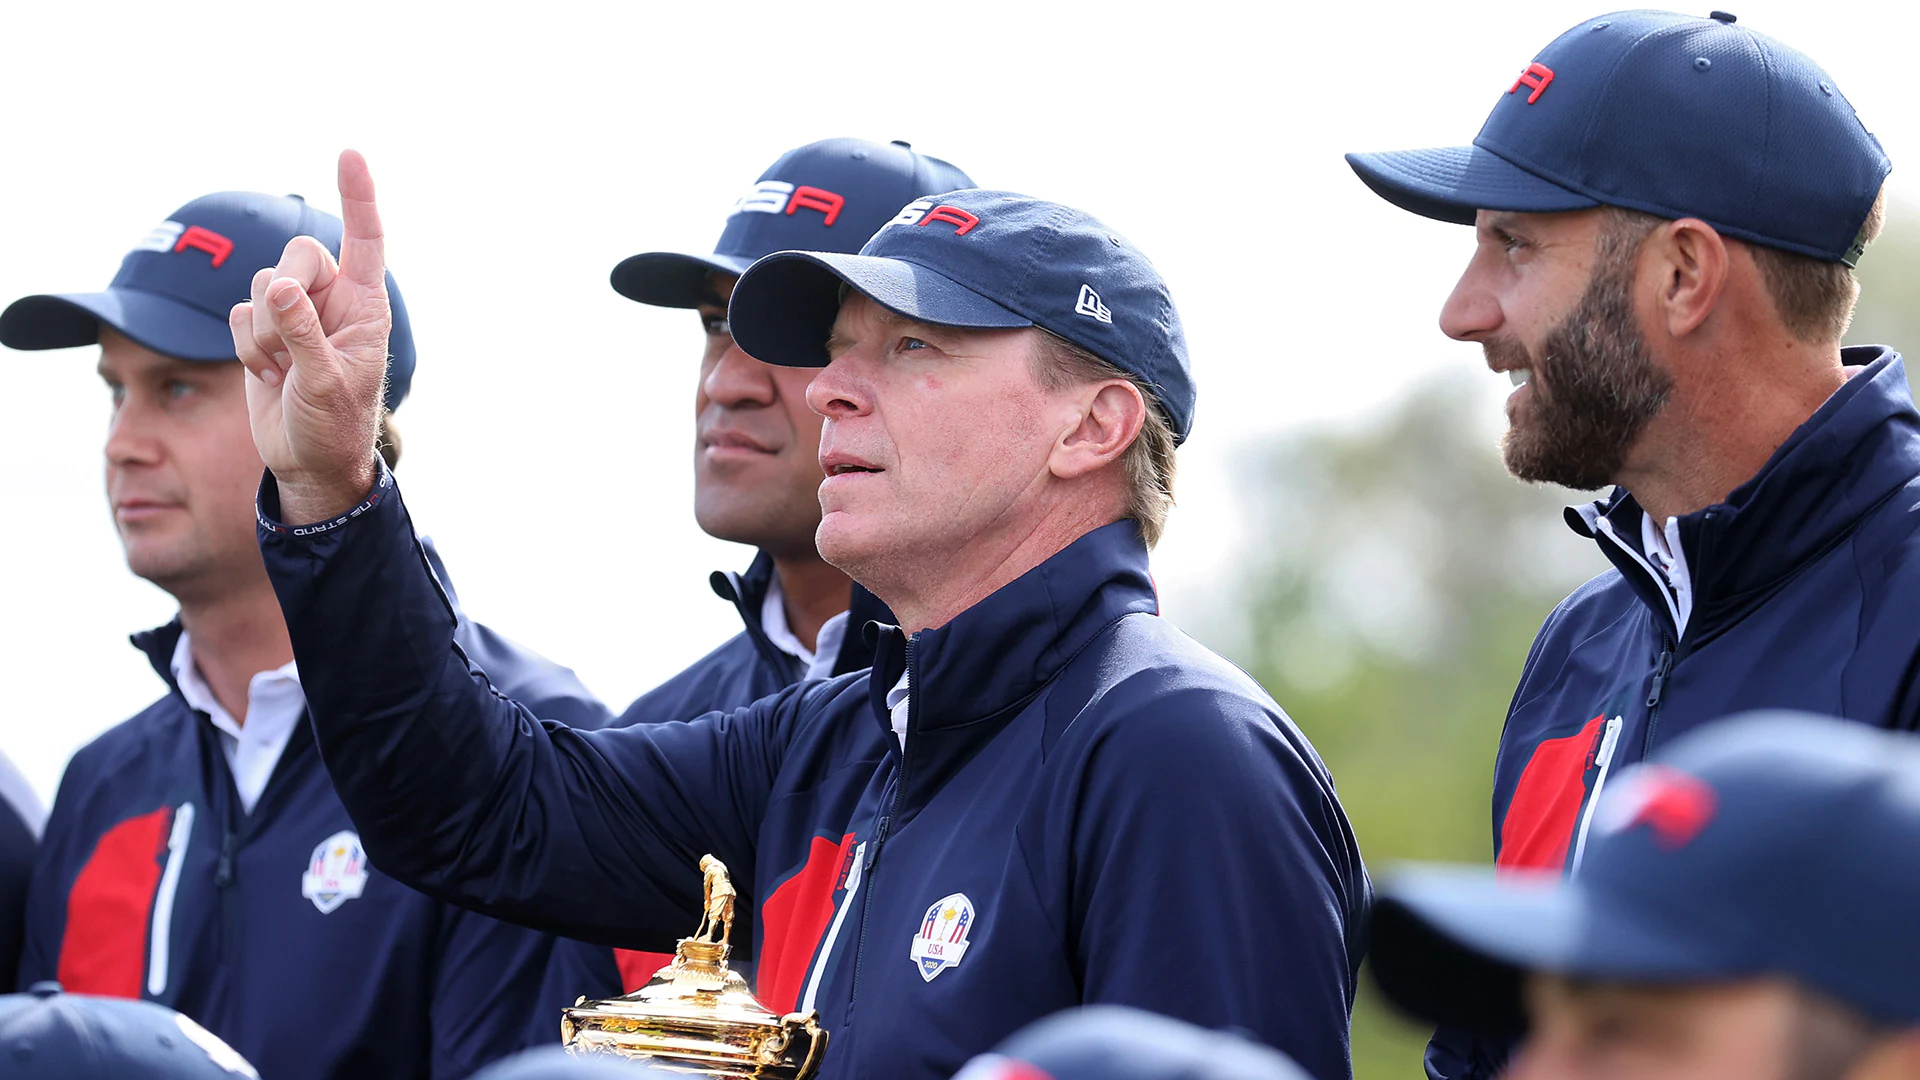 2020 Ryder Cup: Steve Stricker dreading envelope pick, which is multiple players this year due to COVID